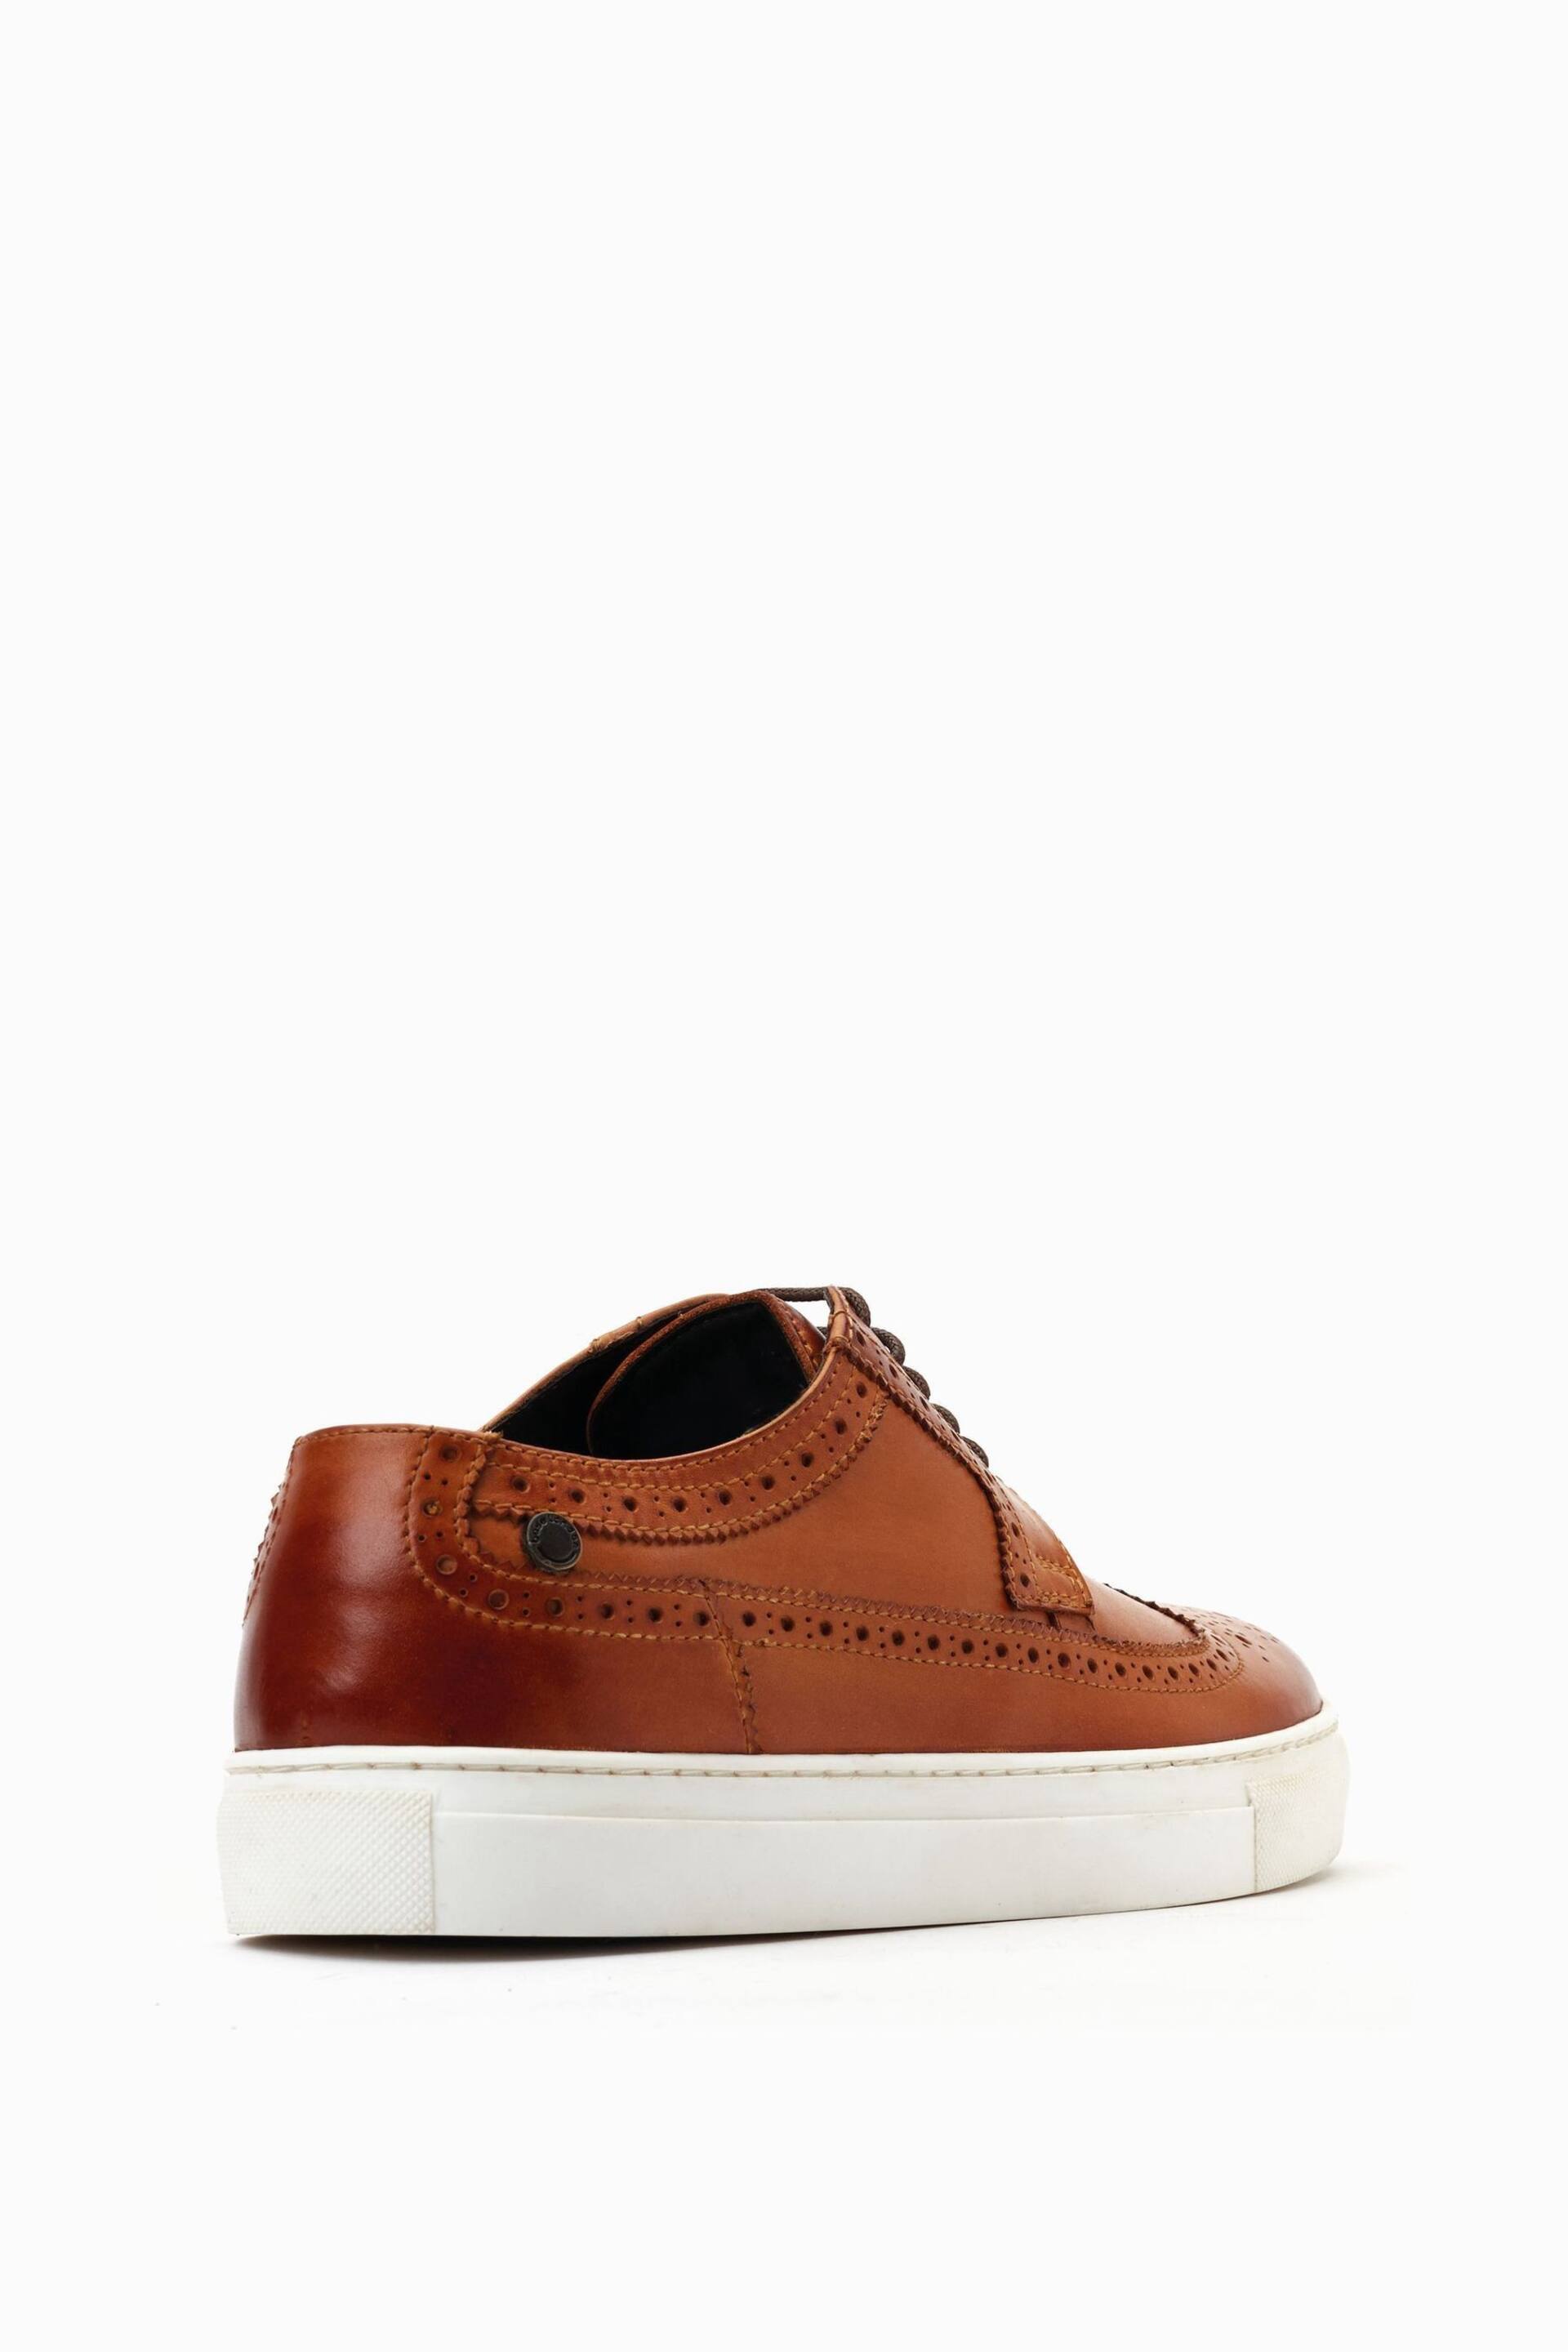 Base London Mickey Lace Up Brown Brogue Trainers - Image 3 of 6